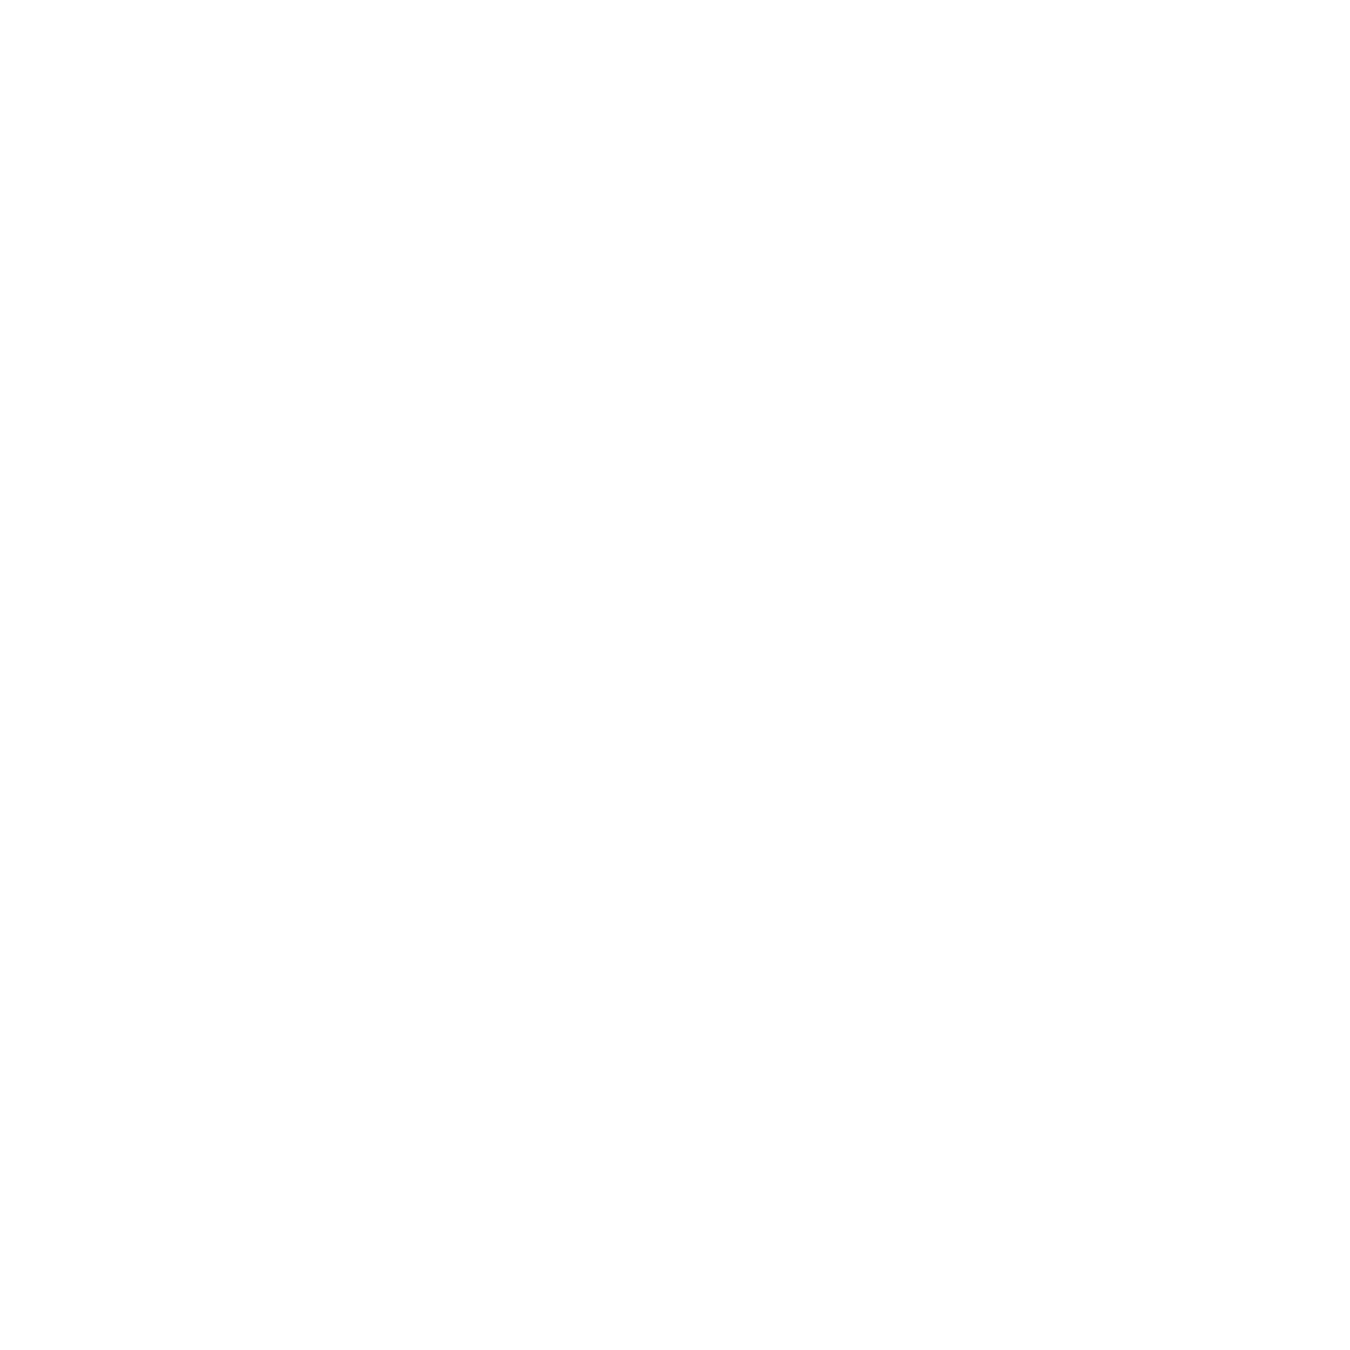 Los Angeles Unified School District Board of Eduation